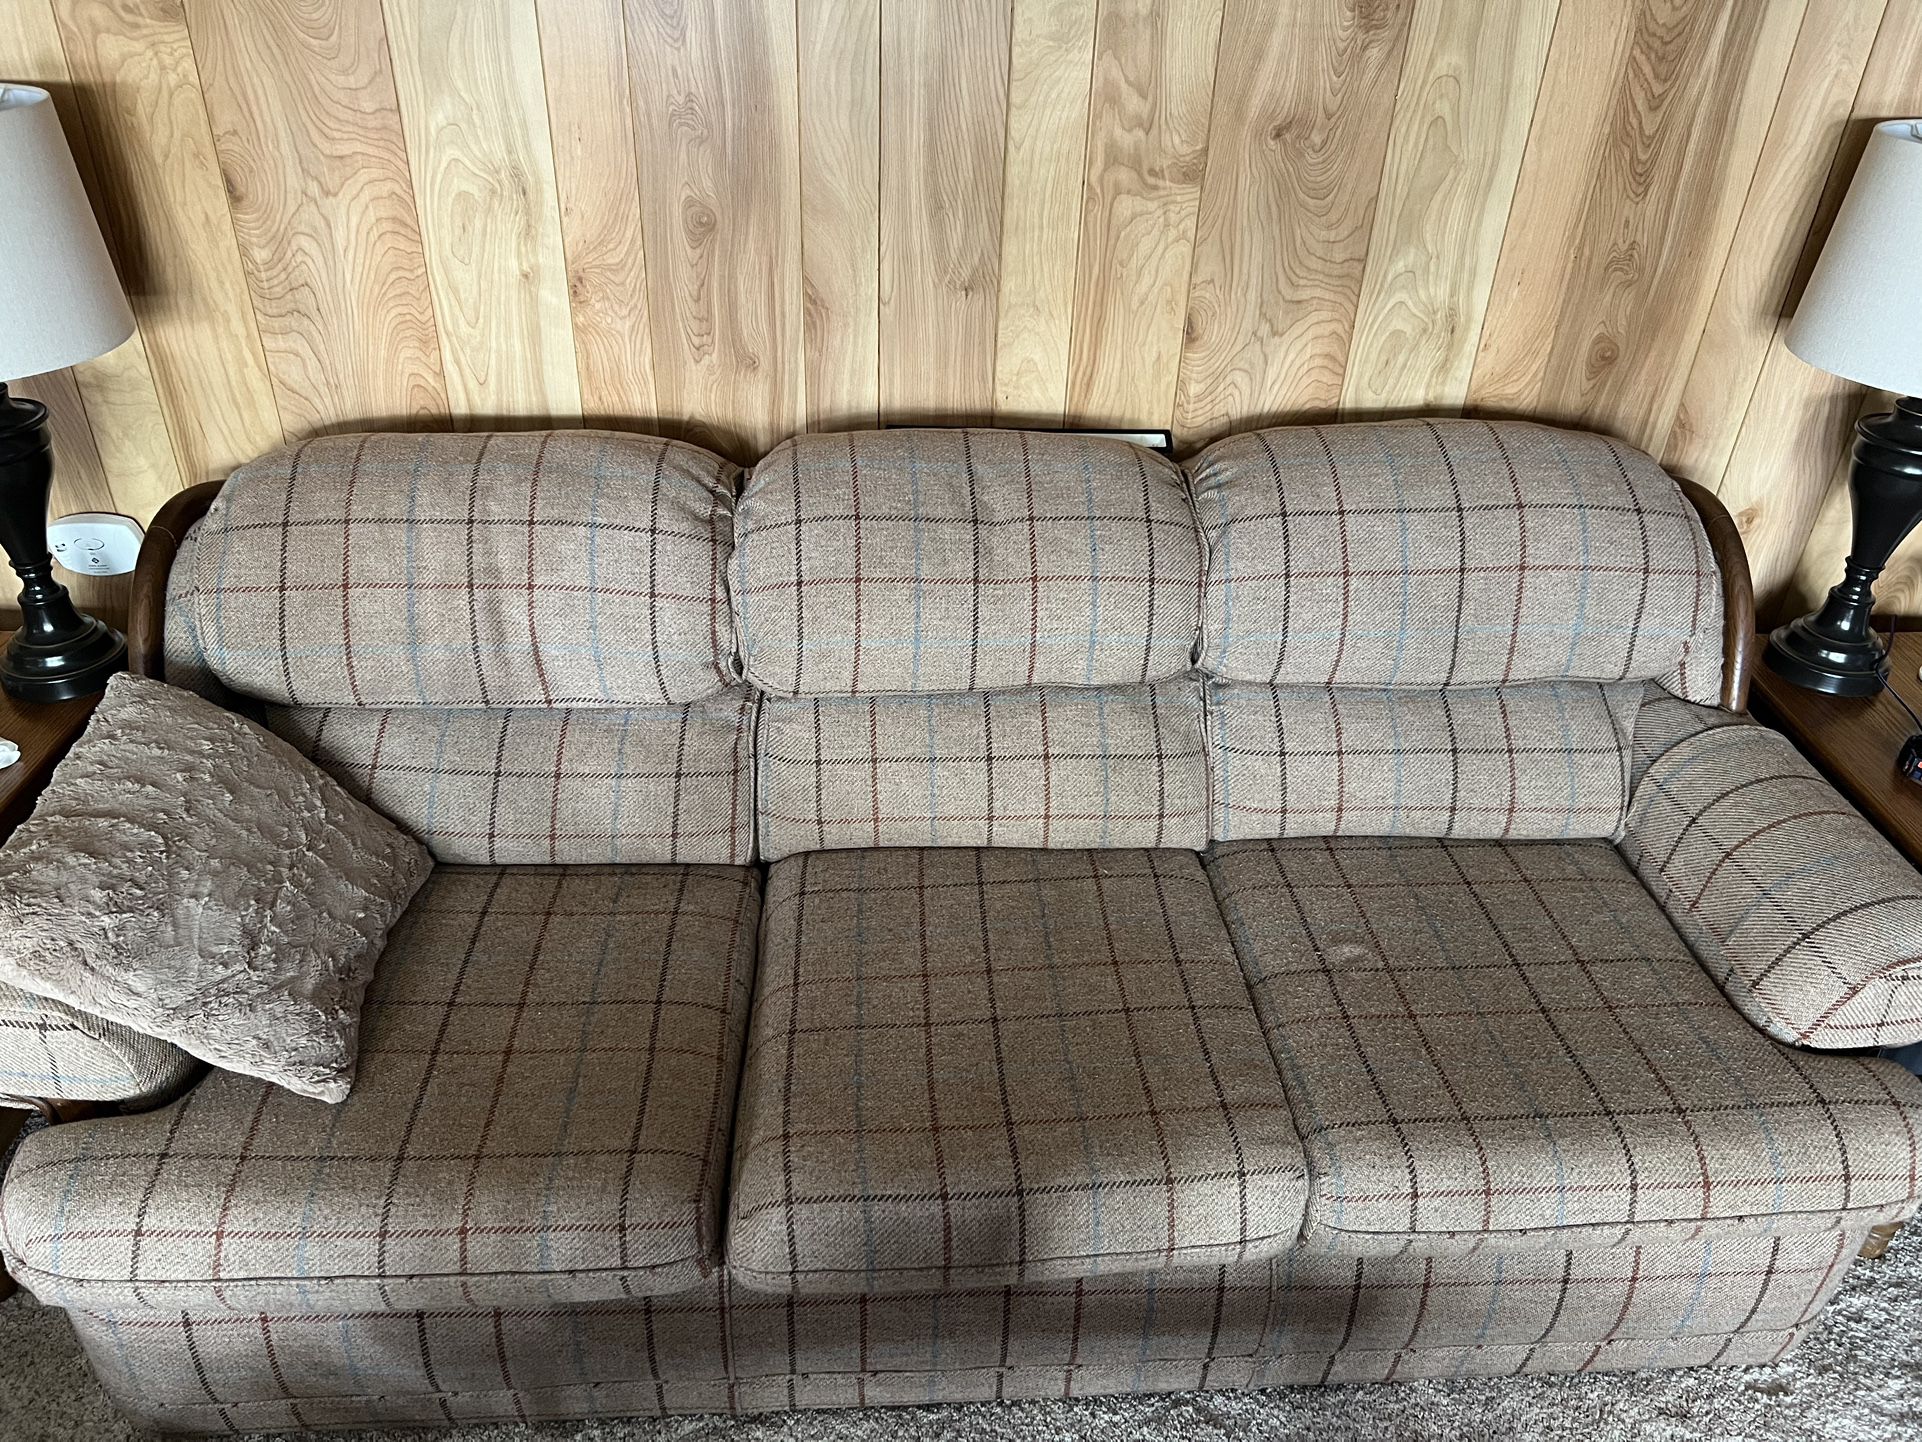 Plaid Couch And Matching Chair 